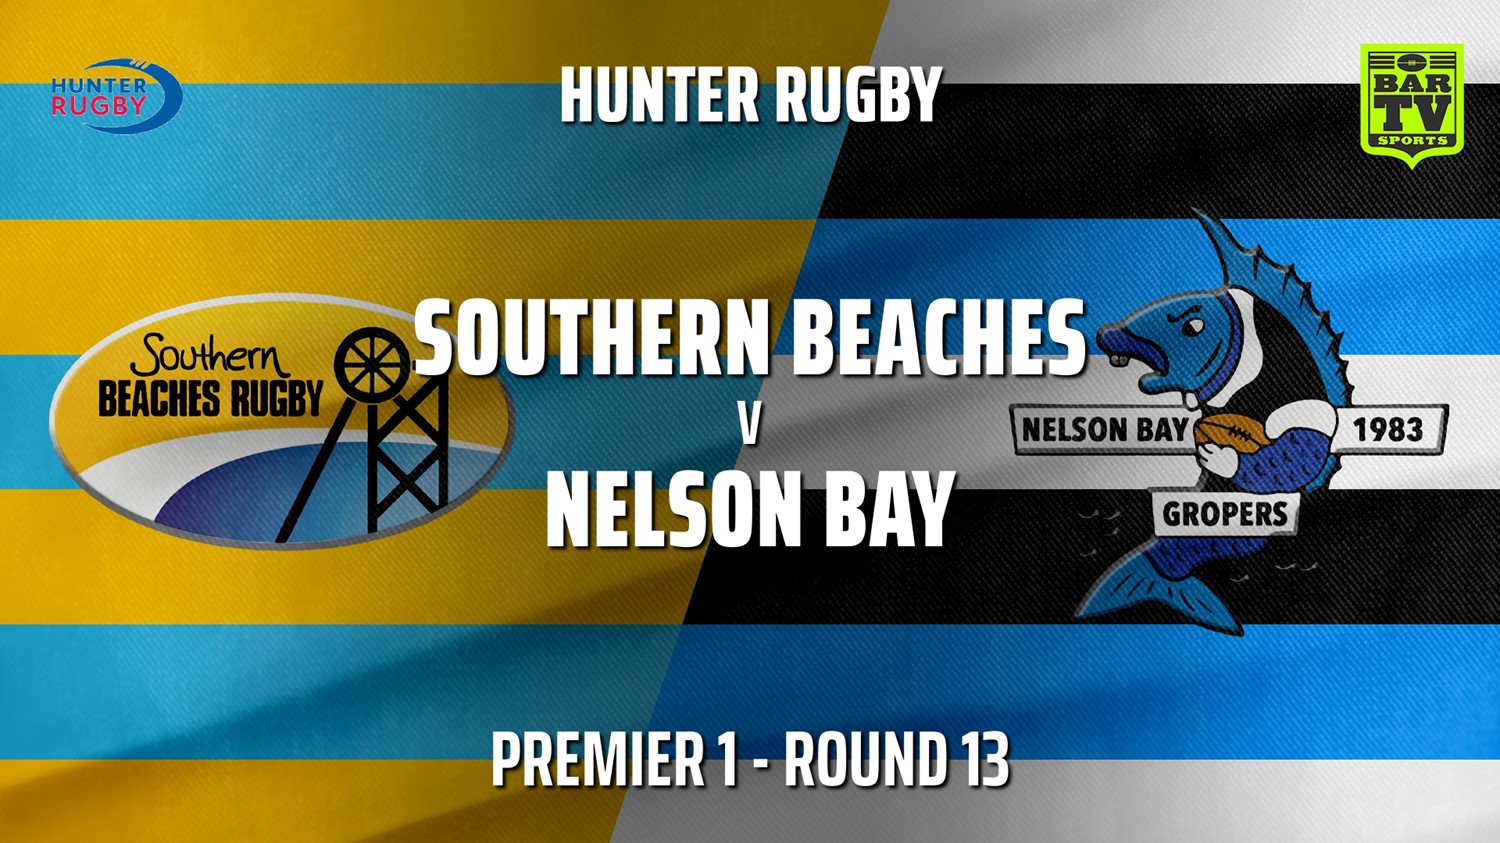 210717-Hunter Rugby Round 13 - Premier 1 - Southern Beaches v Nelson Bay Gropers Slate Image